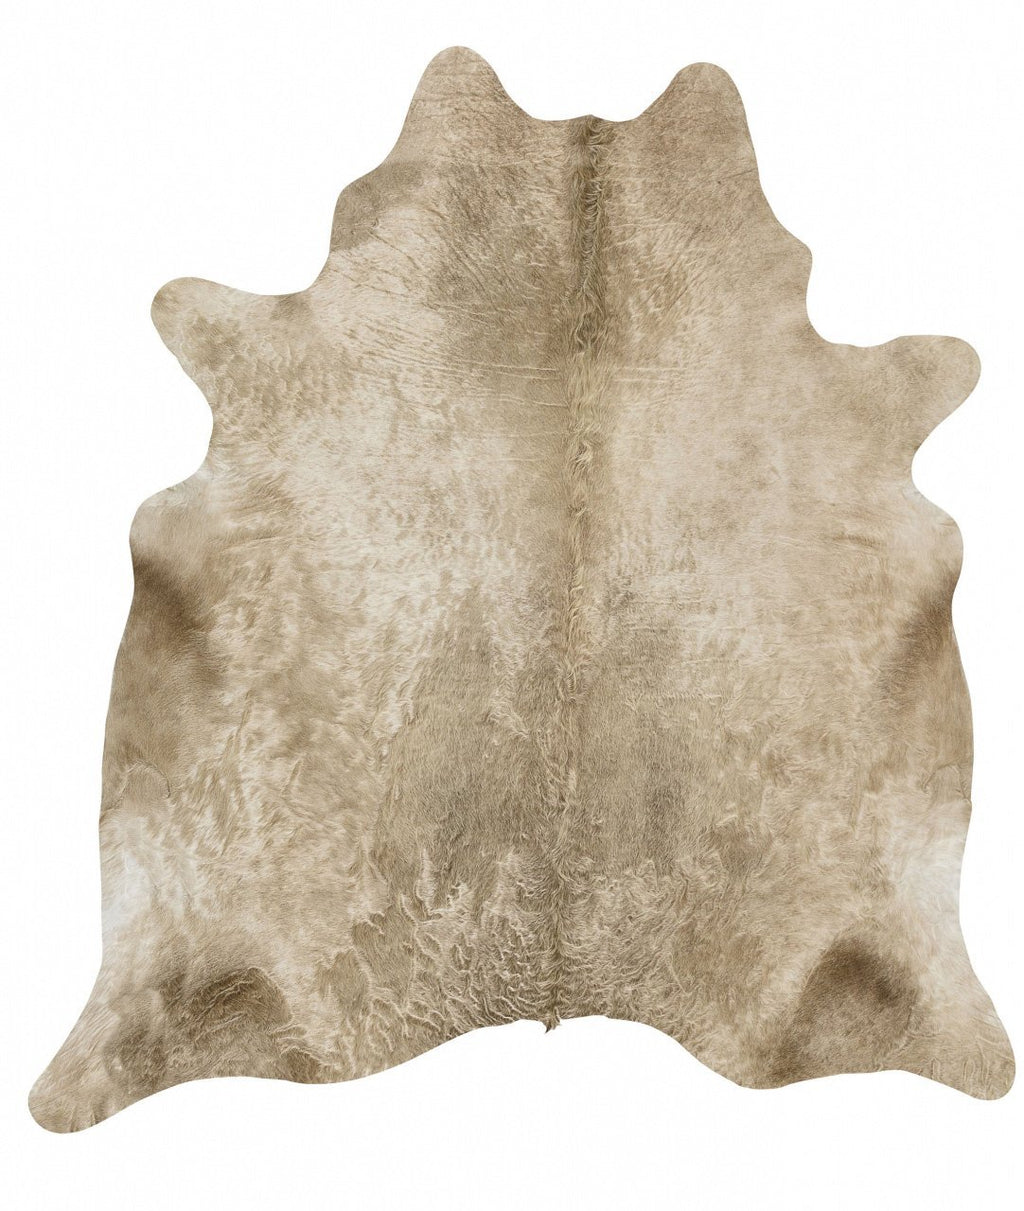 Exquisite Natural Cow Hide Champagne